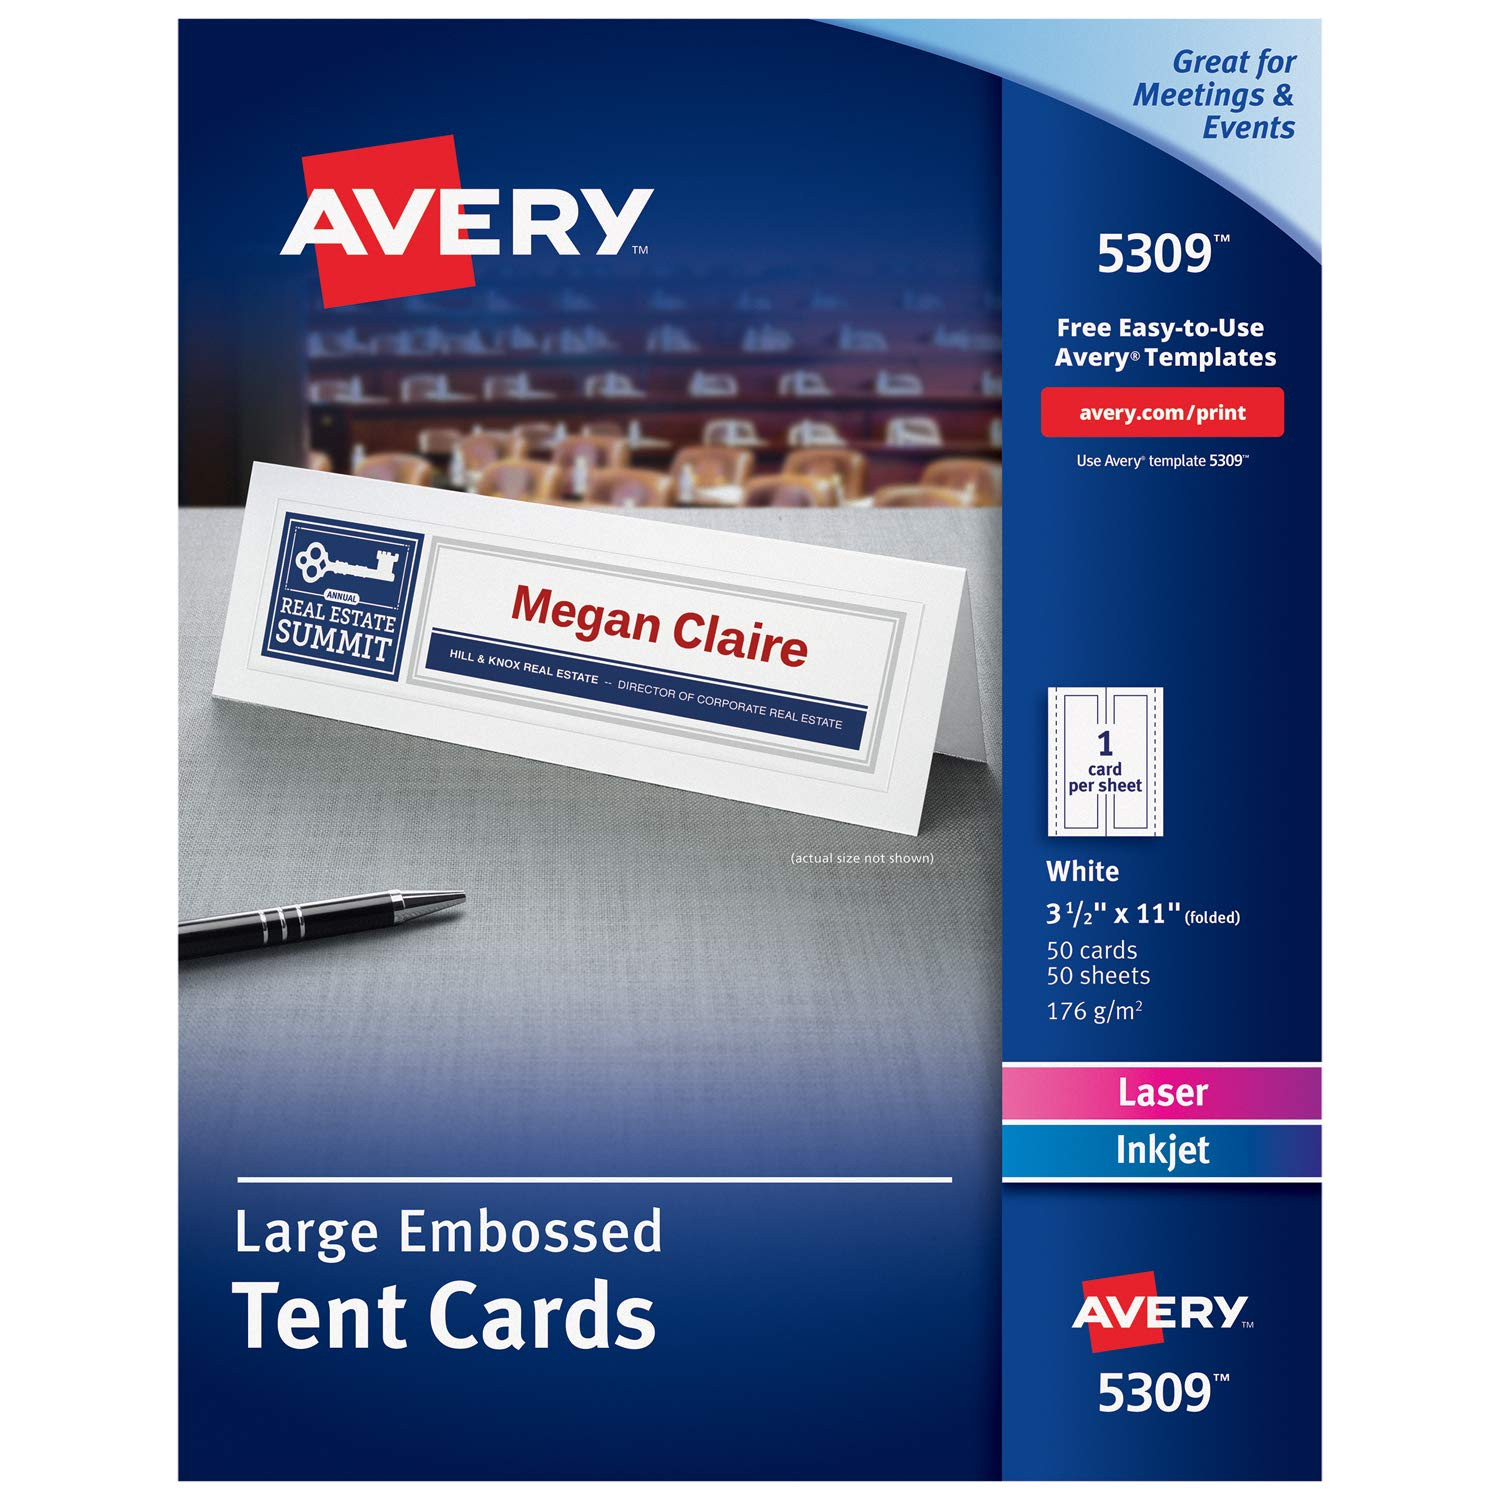 Avery Printable Tent Cards Laser &amp; Inkjet Printers 50 Cards 3 5 X 11 5309 White Of Avery Vertical Business Card Template